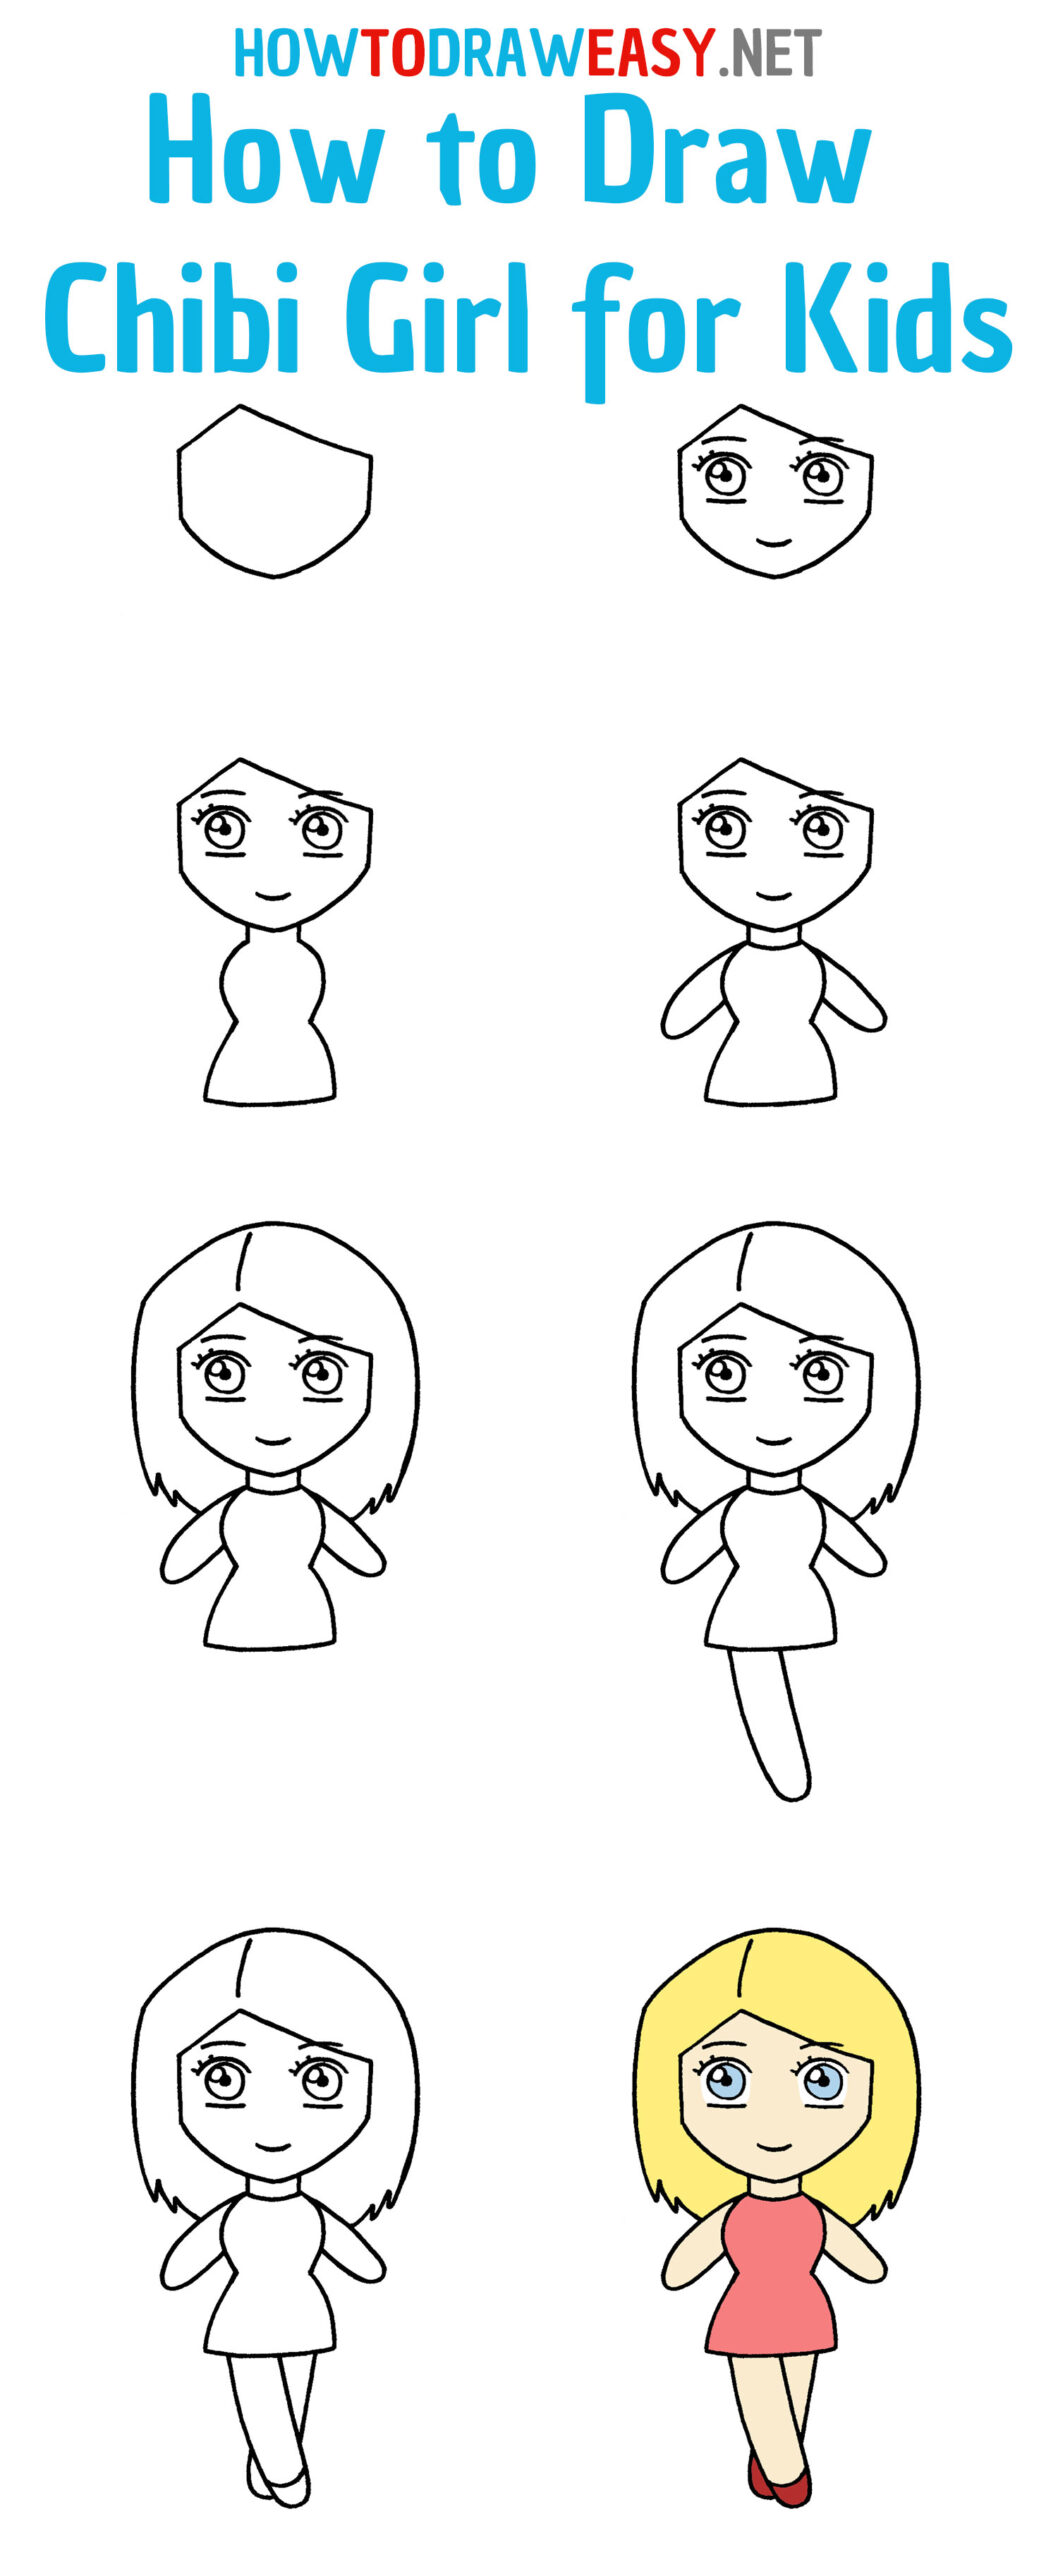 How to Draw Chibi Girl for Kids Step by Step